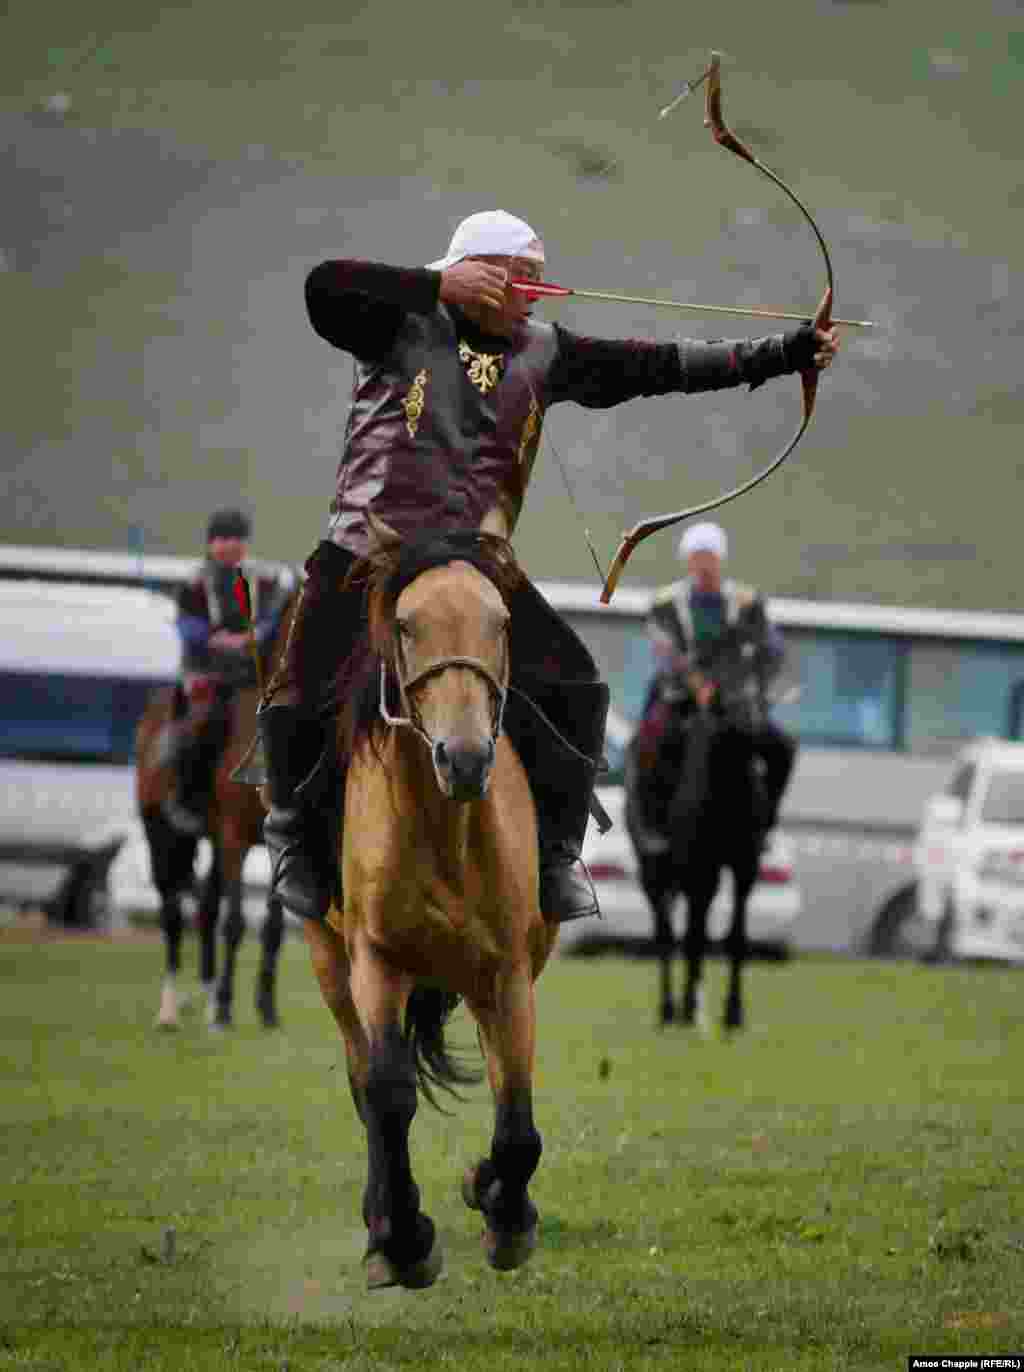 A Kazakh rider about to loose an arrow. One of the competitors explained the difficulty of the event: &quot;If you think too hard about riding, you miss. If you think too hard about your shooting, you can fall off your horse. It&#39;s very dangerous.&quot;&nbsp;